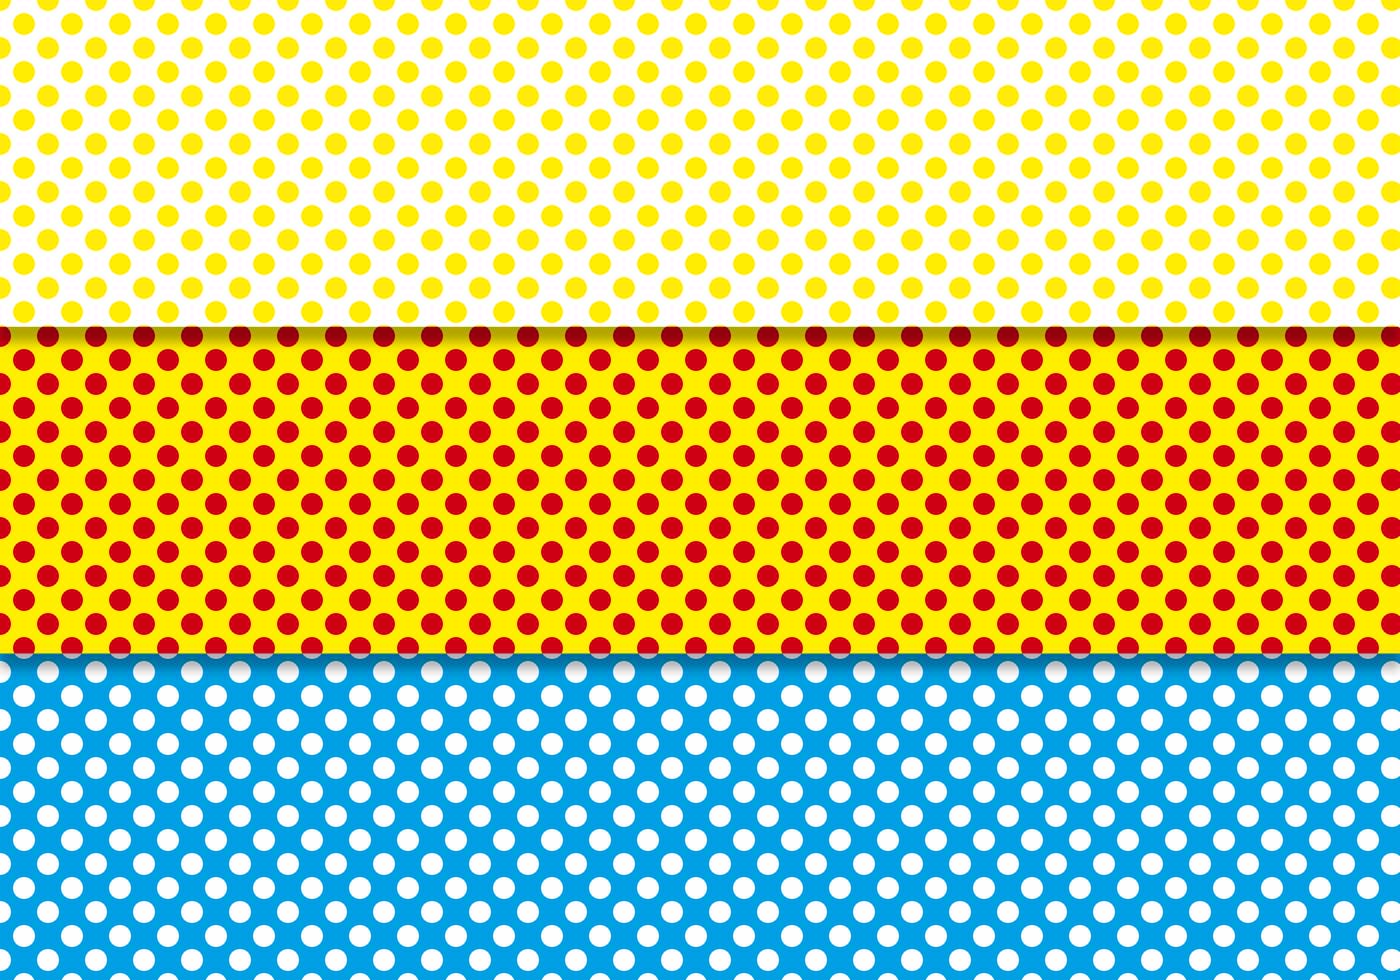 Free Polka Dot Background Vector - Download Free Vector Art, Stock